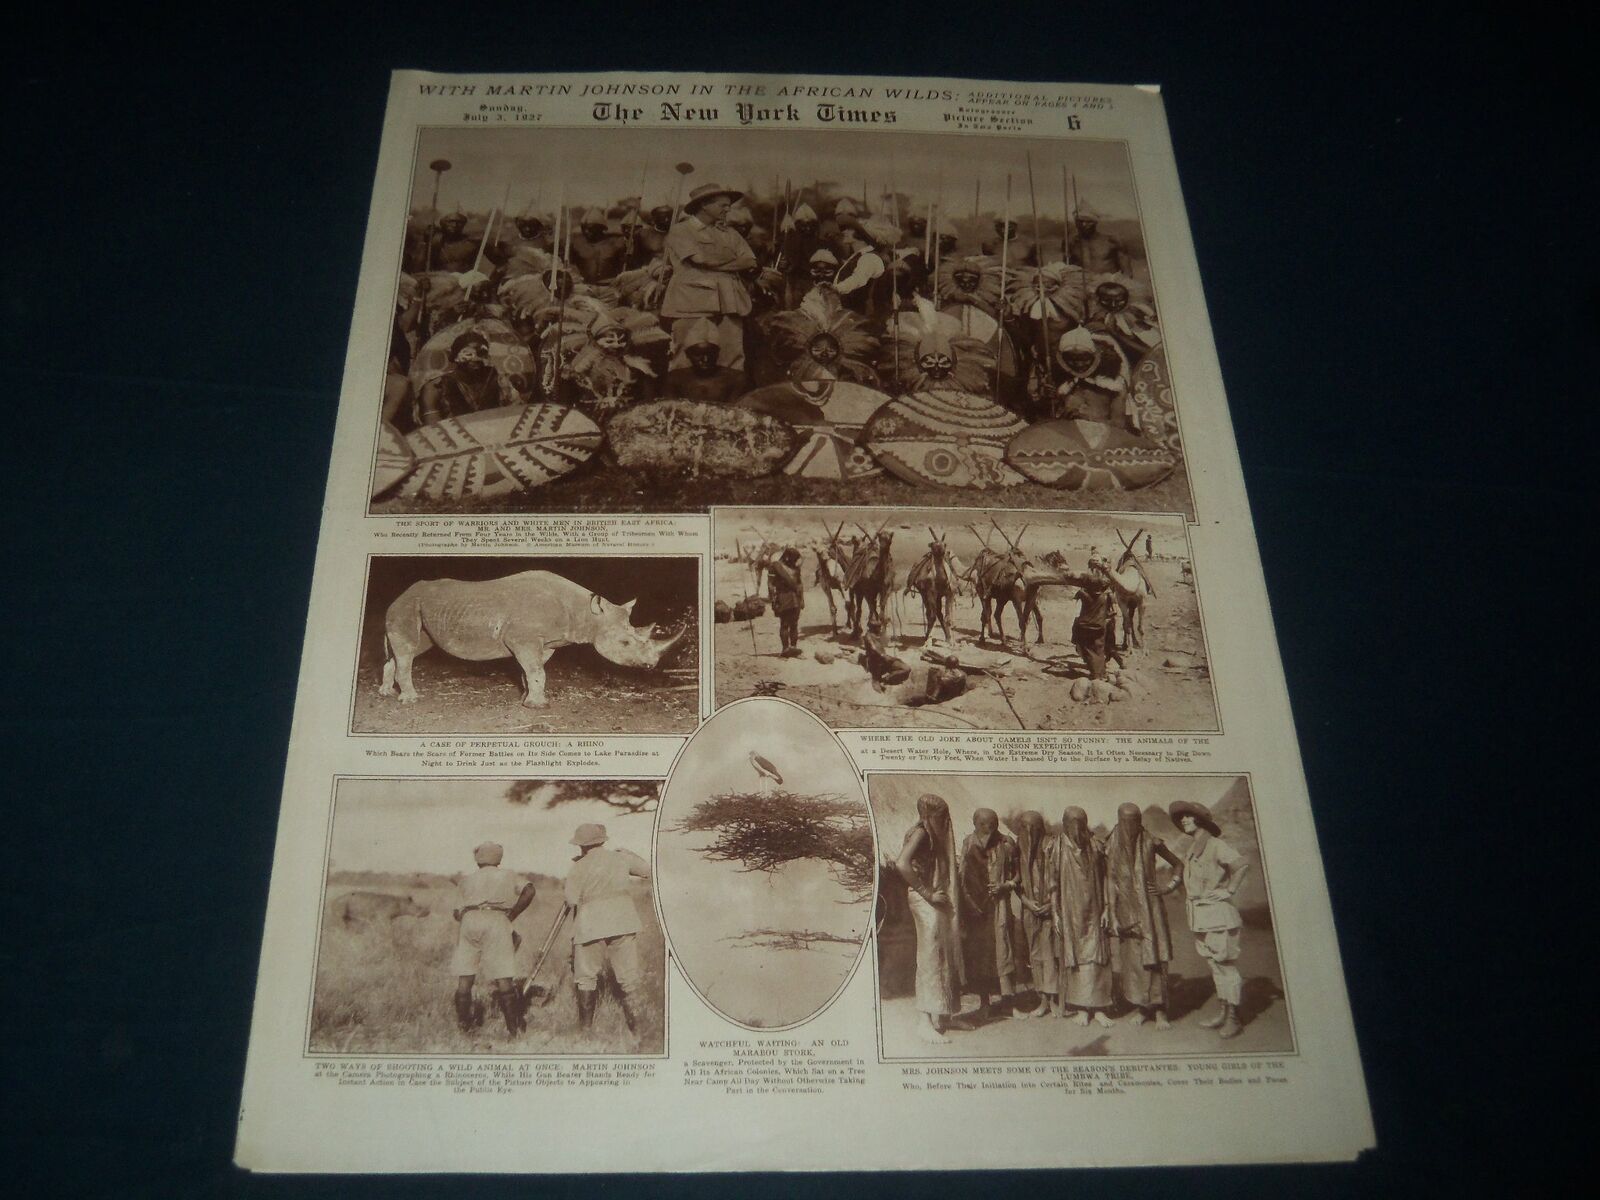 1927 JULY 3 NEW YORK TIME PICTURE SECTION - MARTIN JOHNSON IN AFRICA - NT 7391